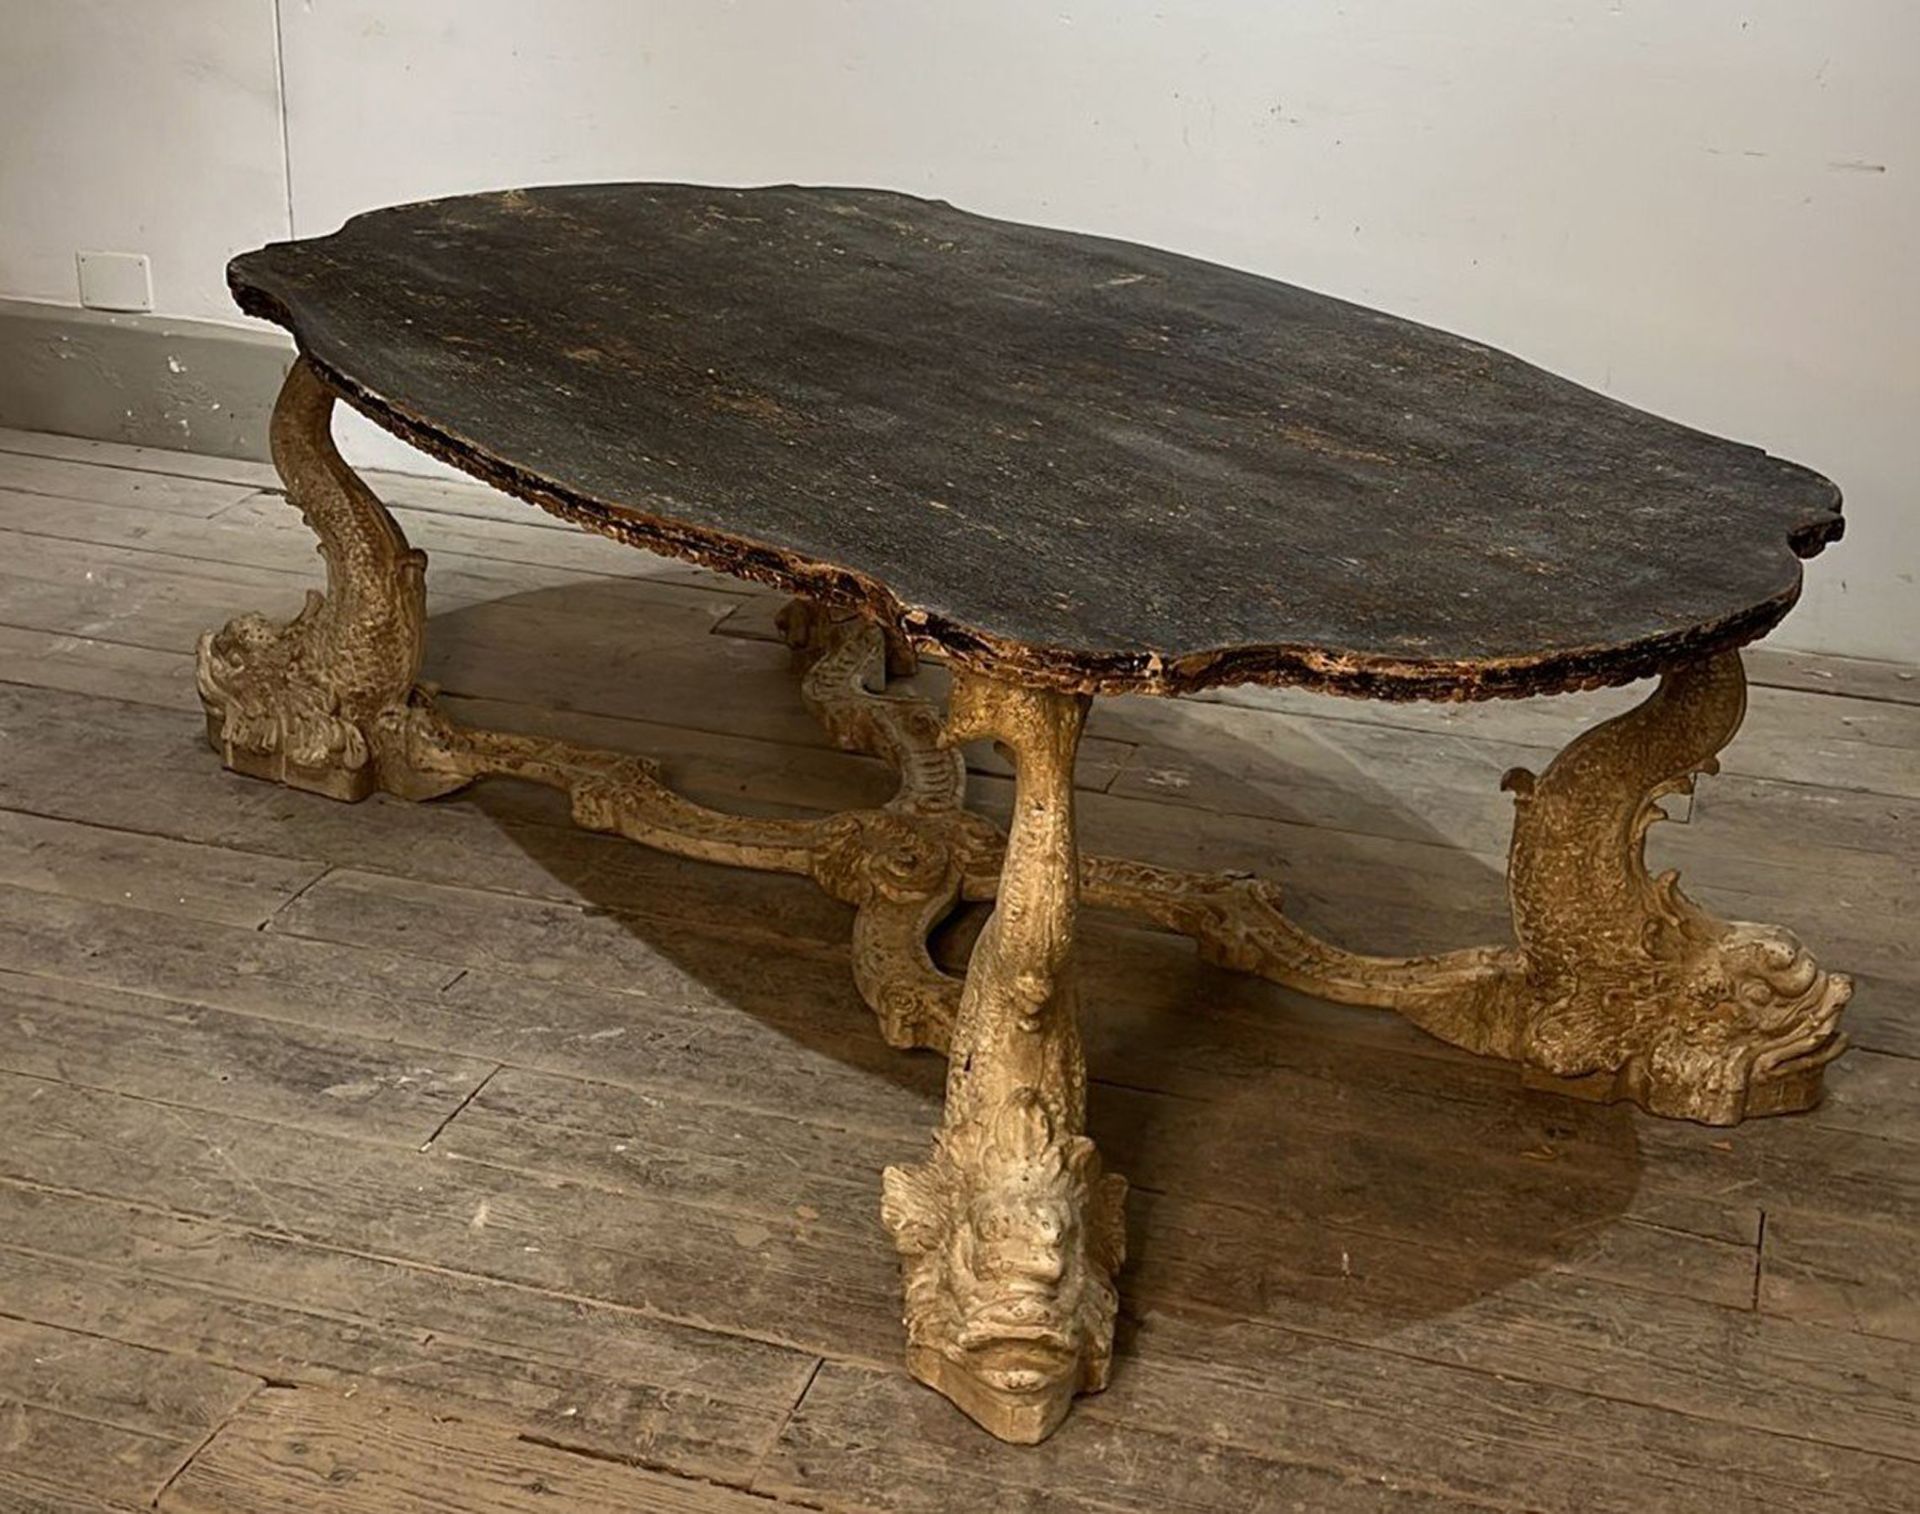 Large Italian Table from the 50s with dolphin legs, Venetian work of the 20th century - Image 5 of 5